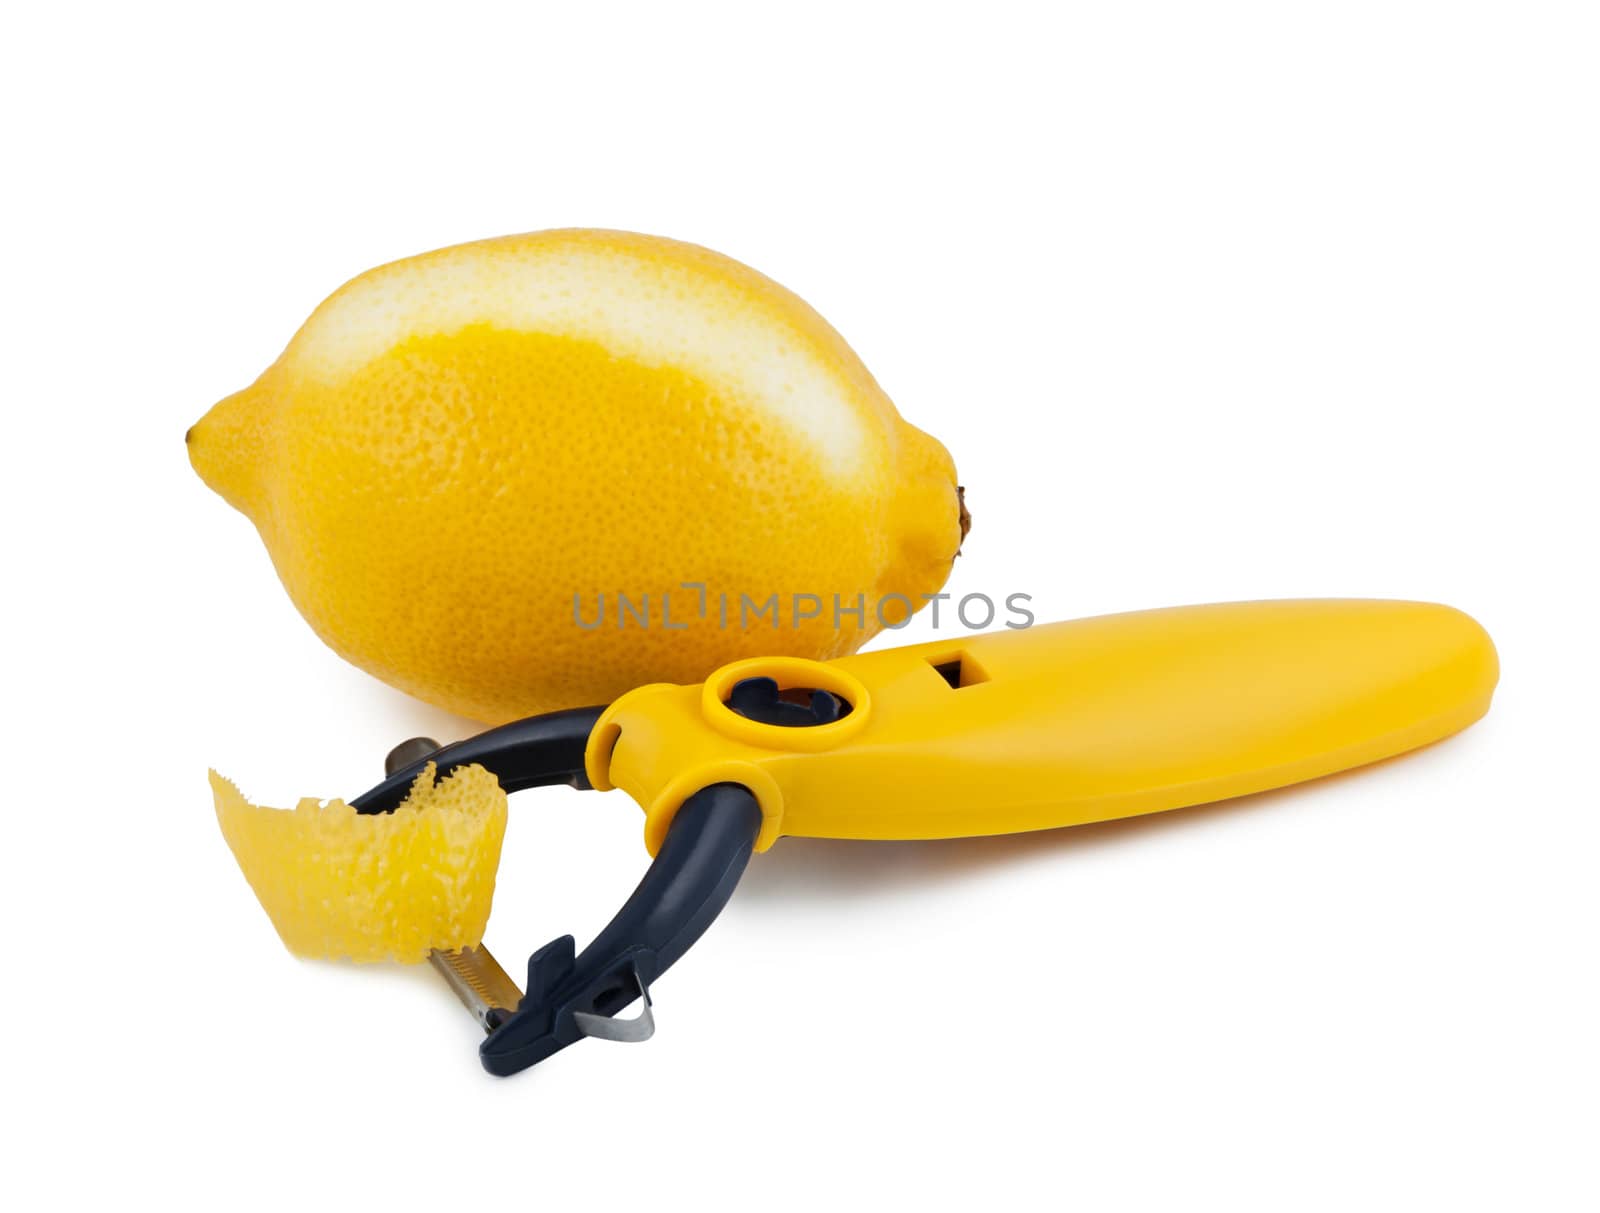 Lemon and knife to clean fruit on white background.